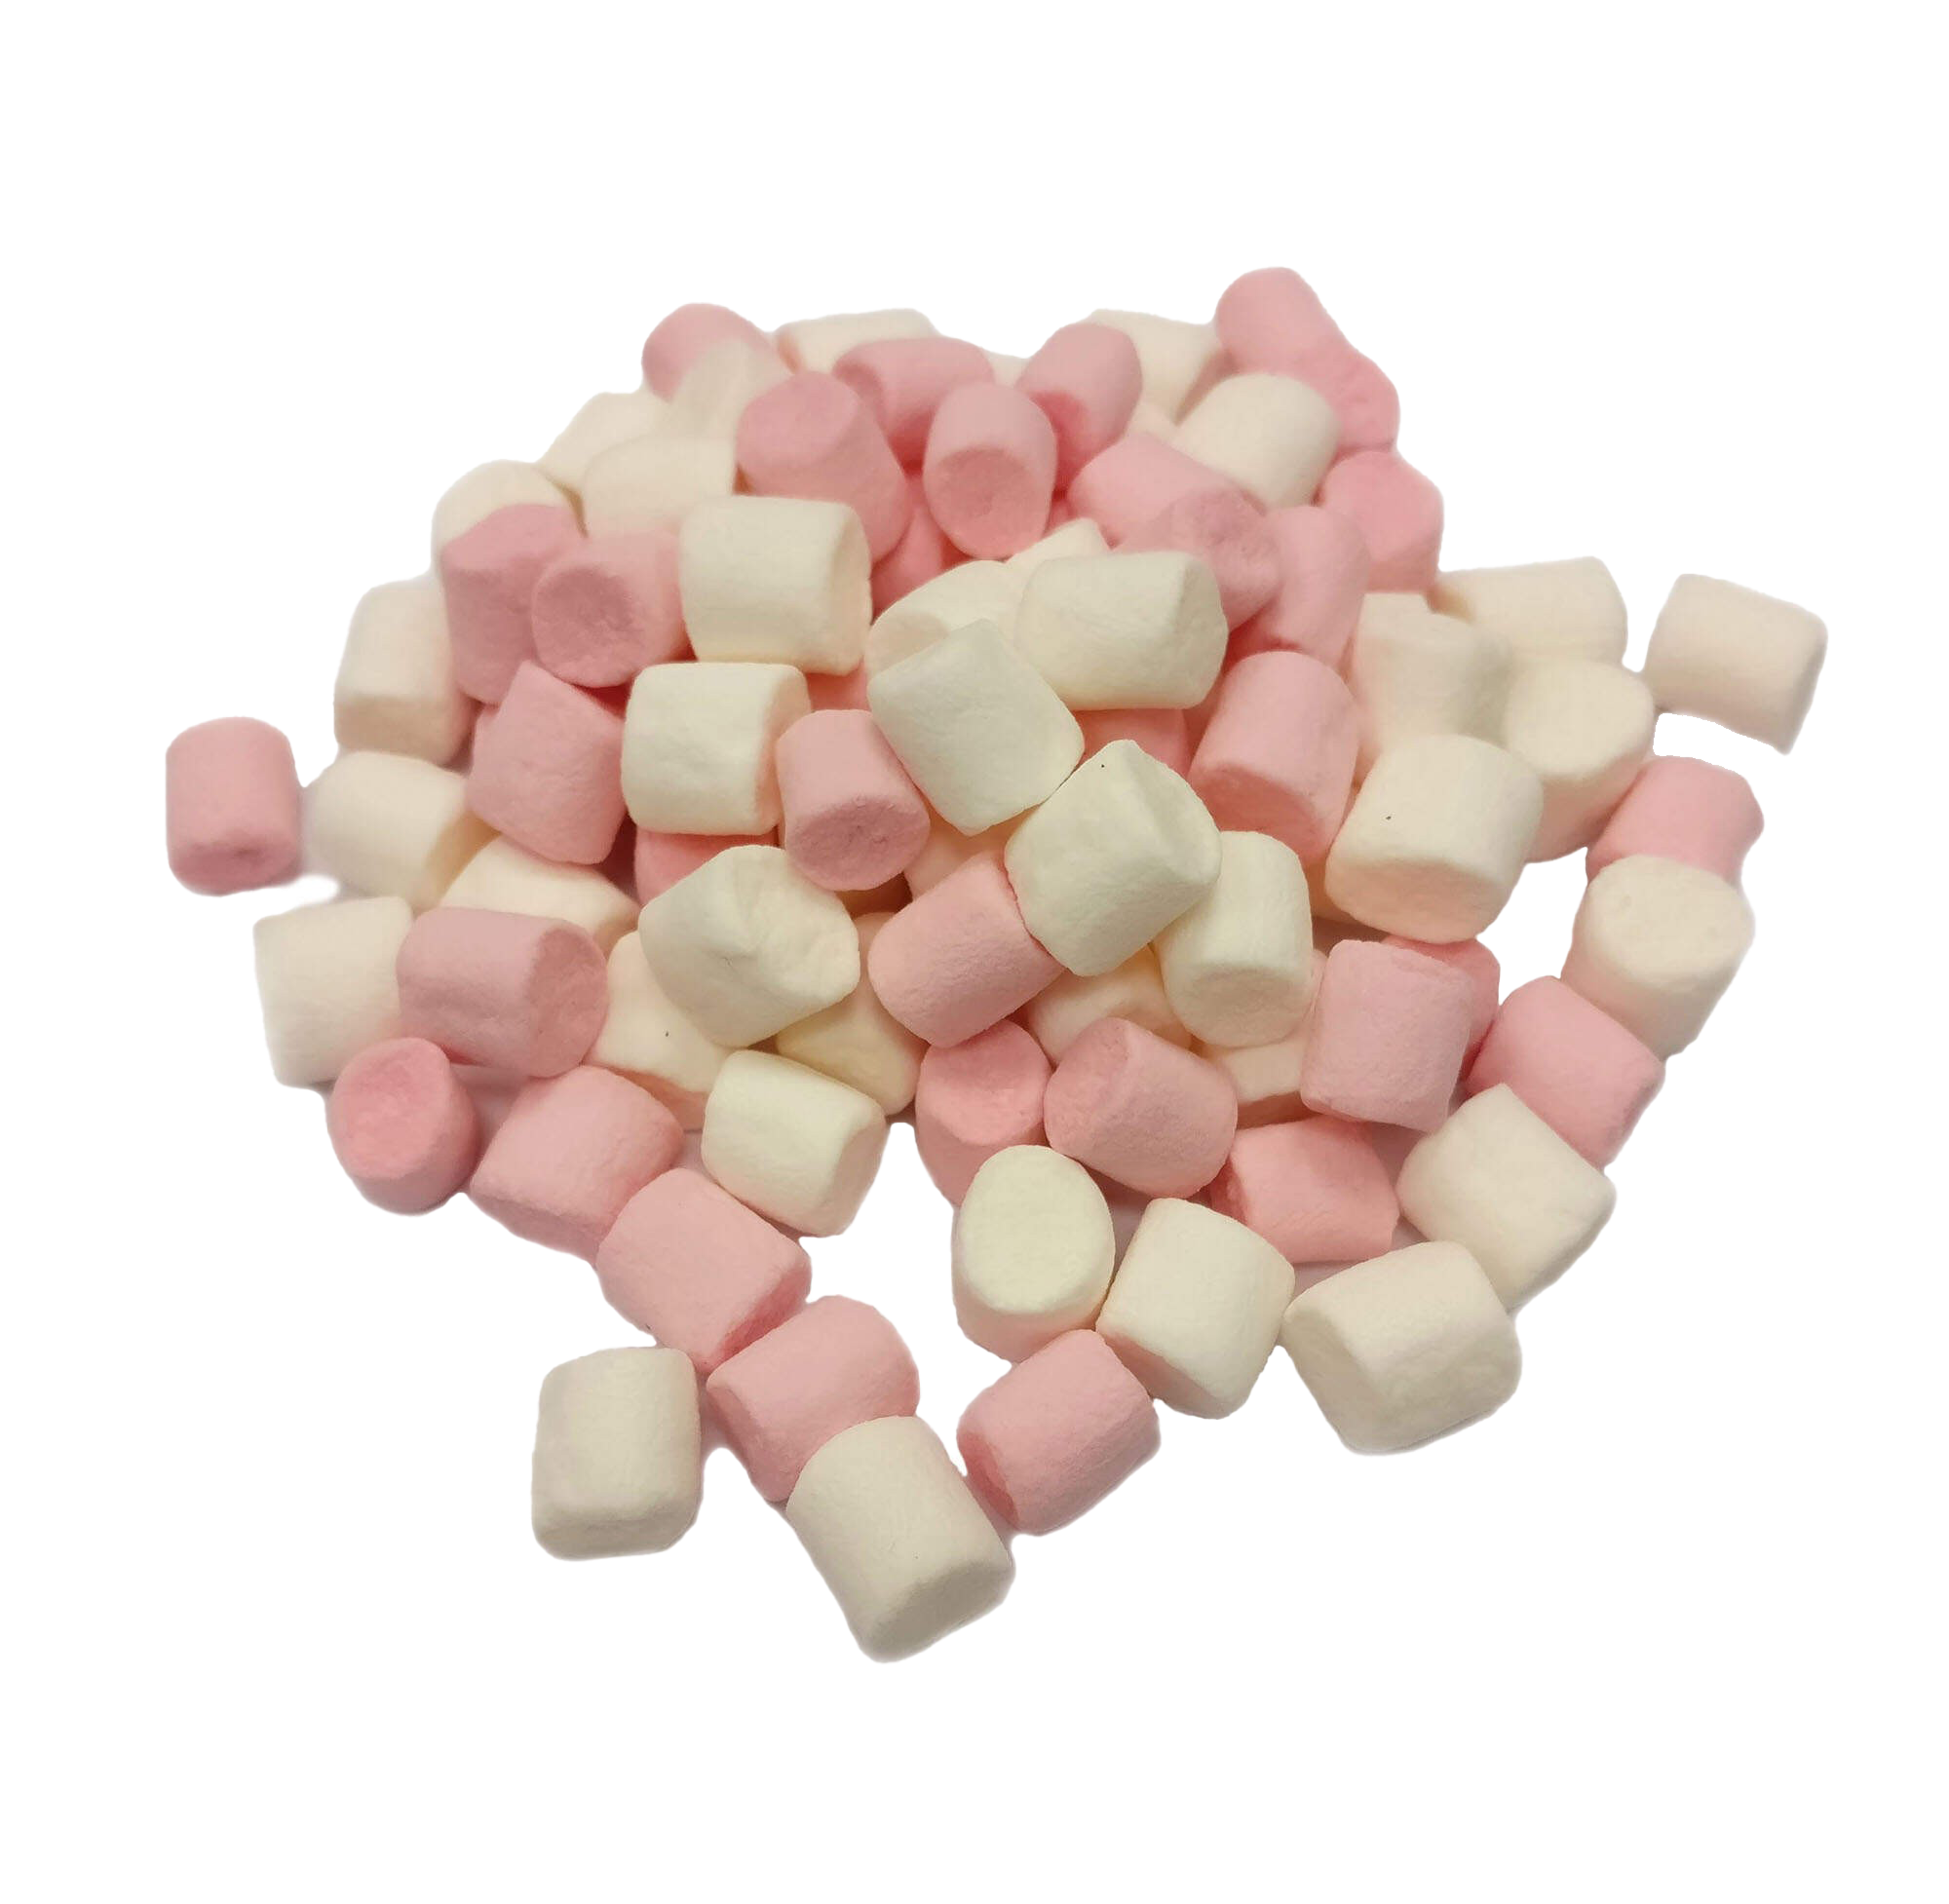 A Pile Of Marshmallows On A Black Background